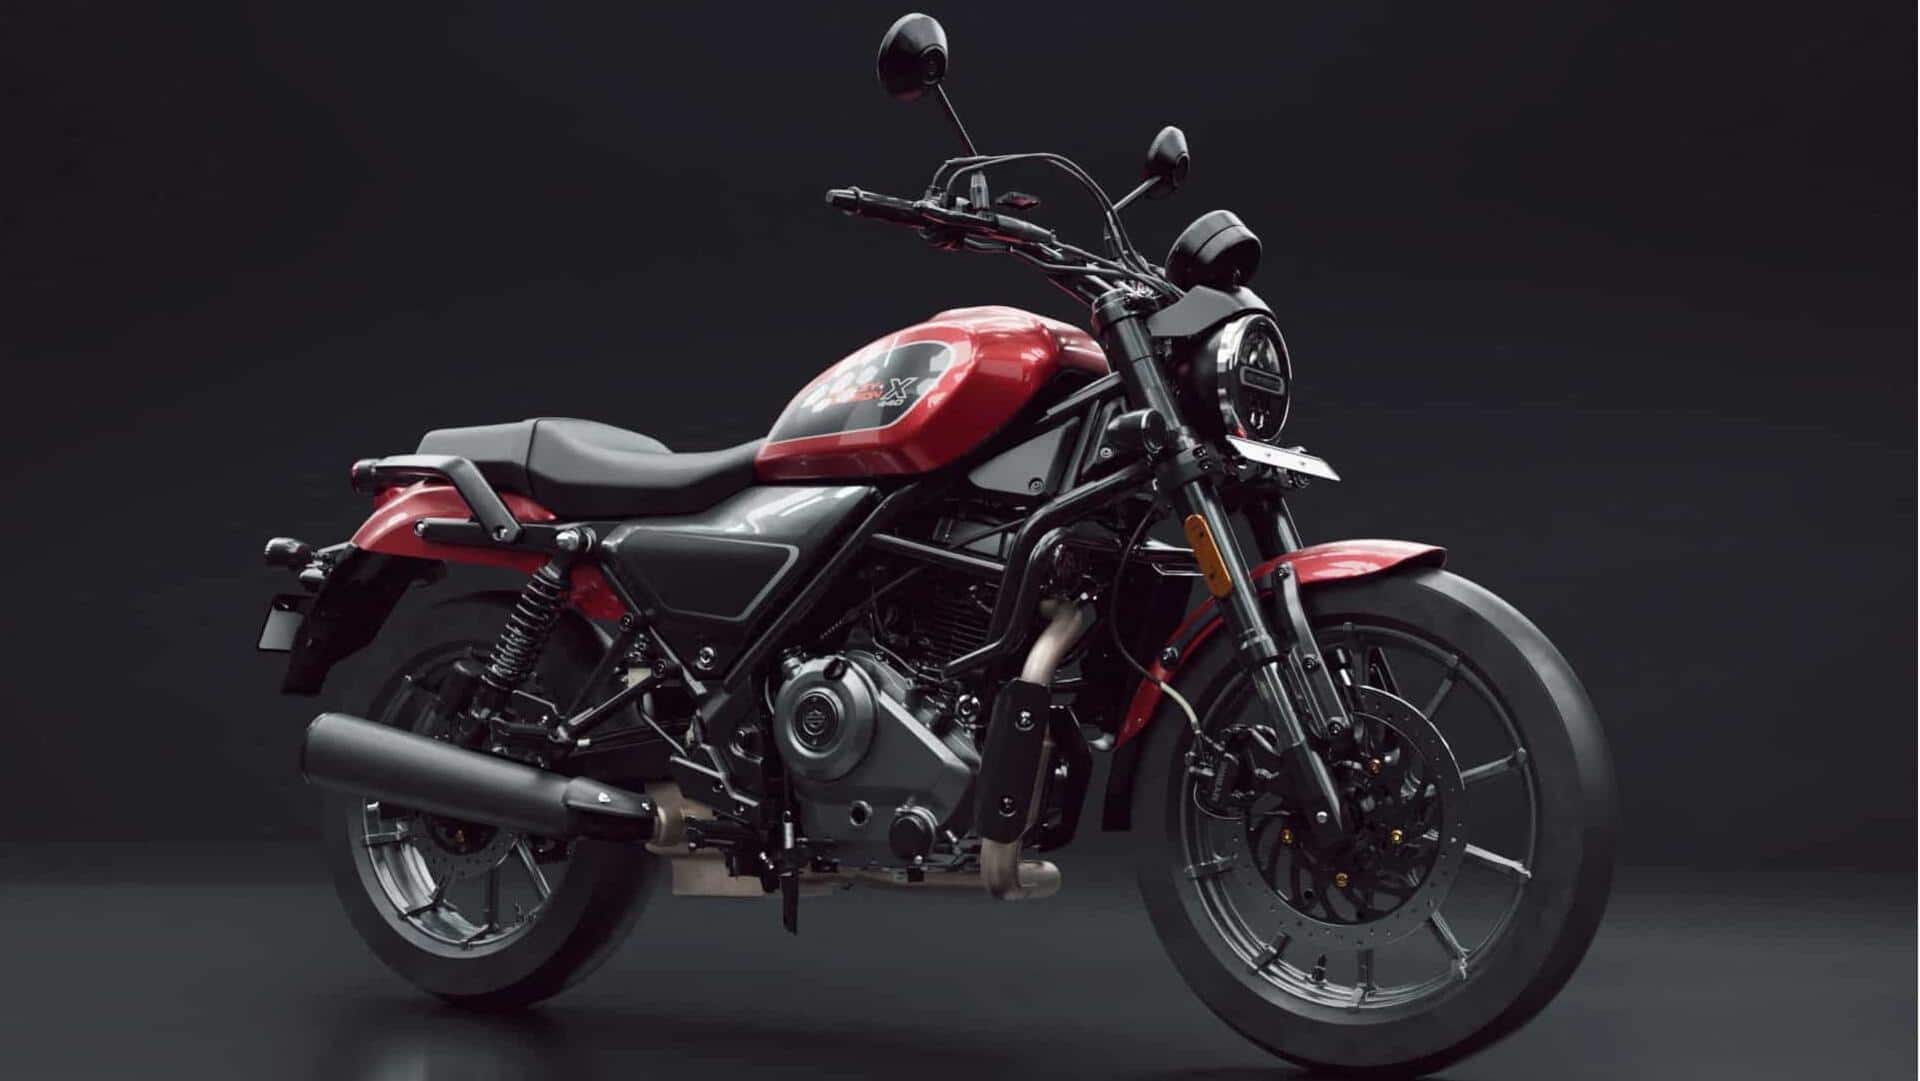 Hero MotoCorp and Harley-Davidson discuss expansion in India